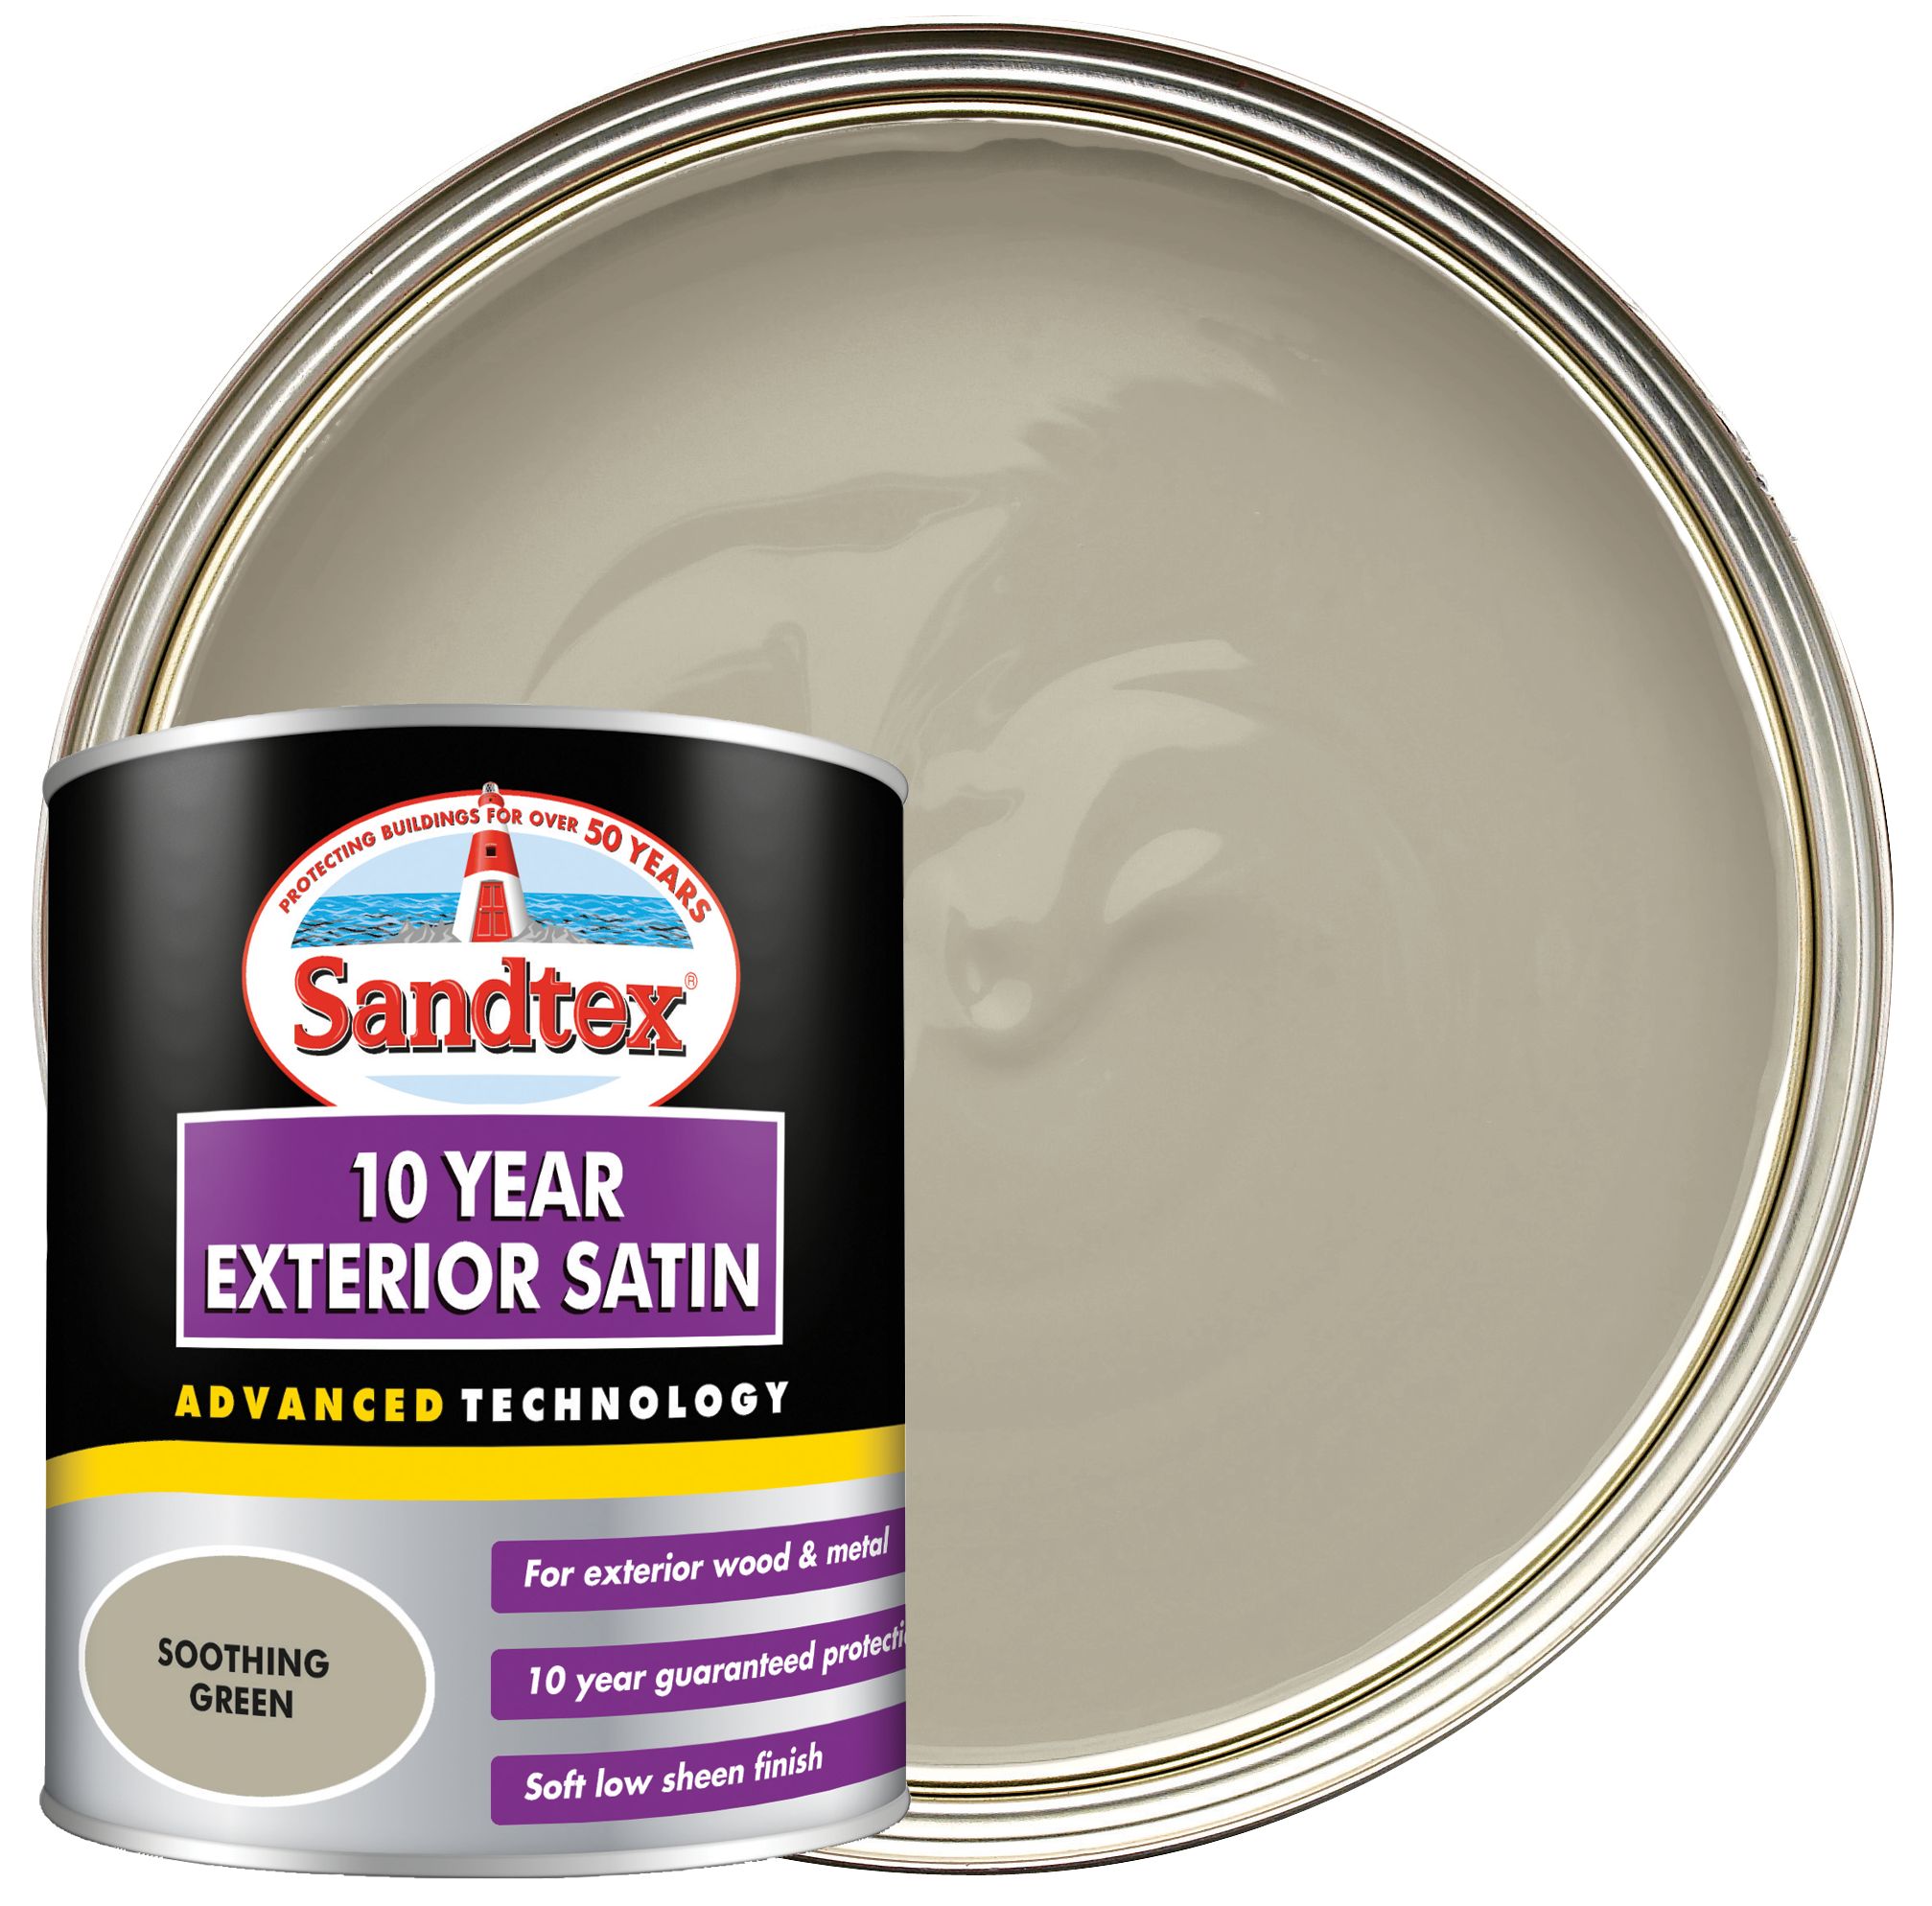 Image of Sandtex 10 Year Exterior Satin Paint - Soothing Green - 750ml